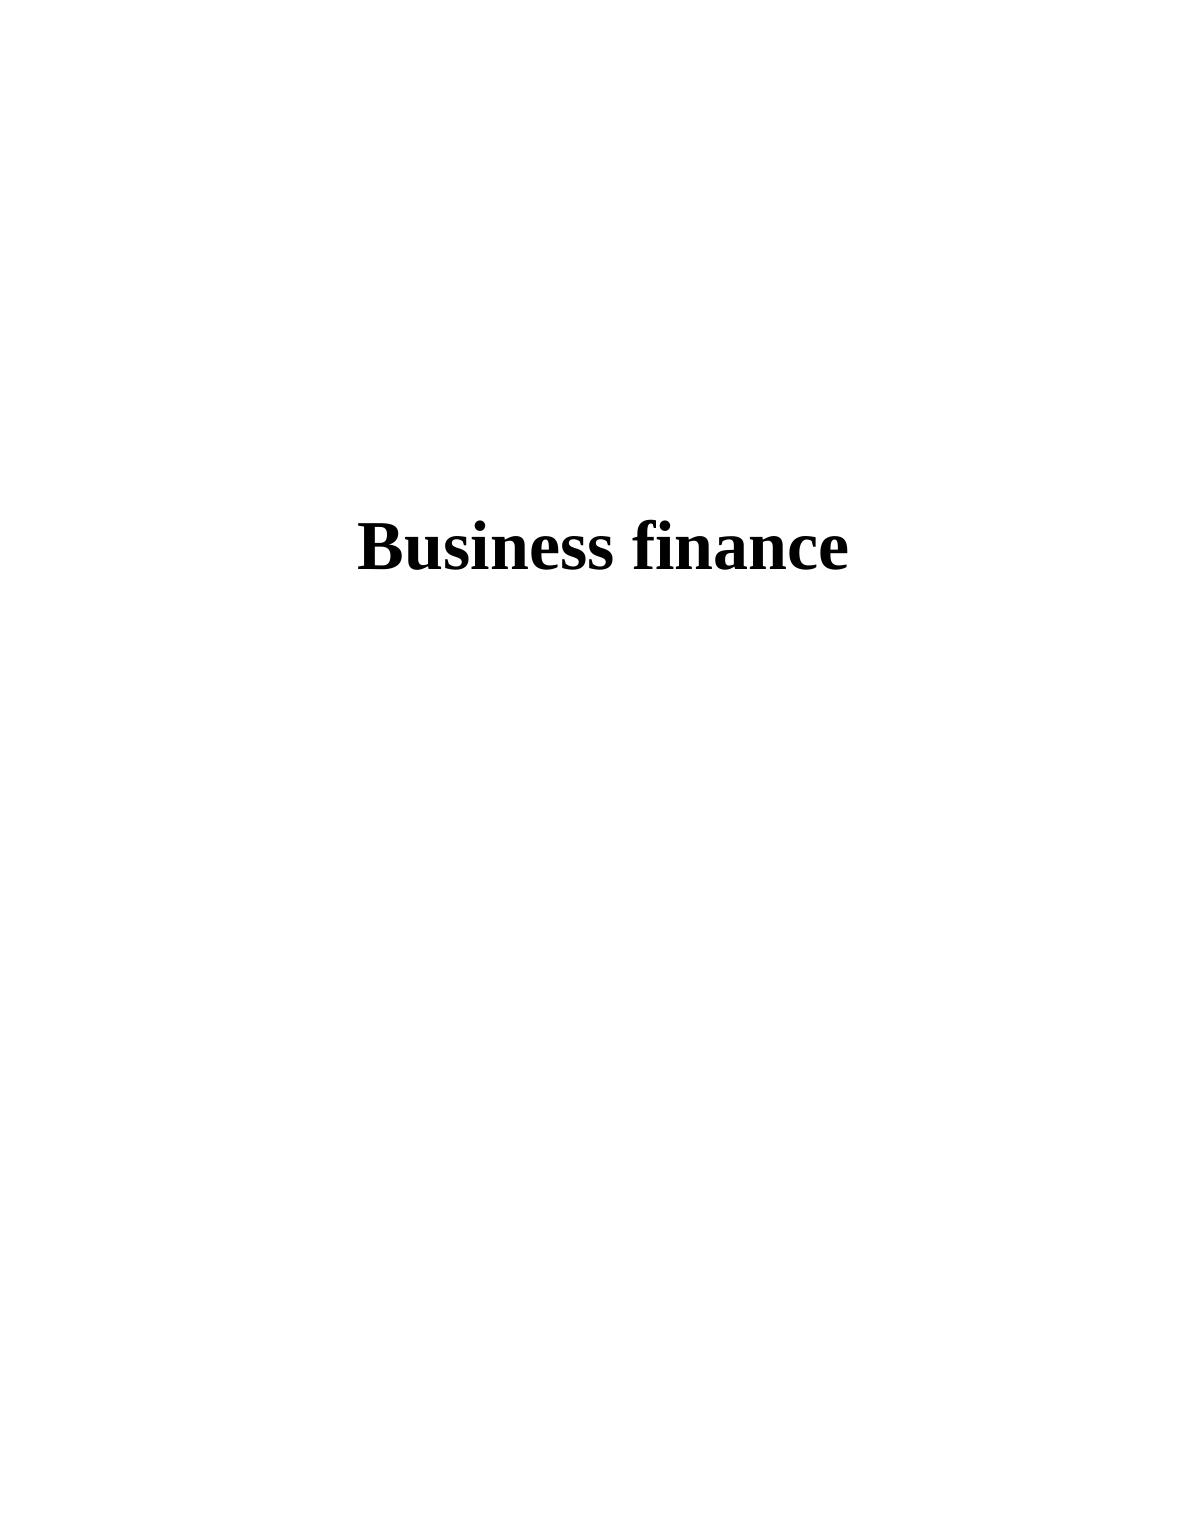 Business Finance: Meaning, Difference between Profit and Cash Flows_1